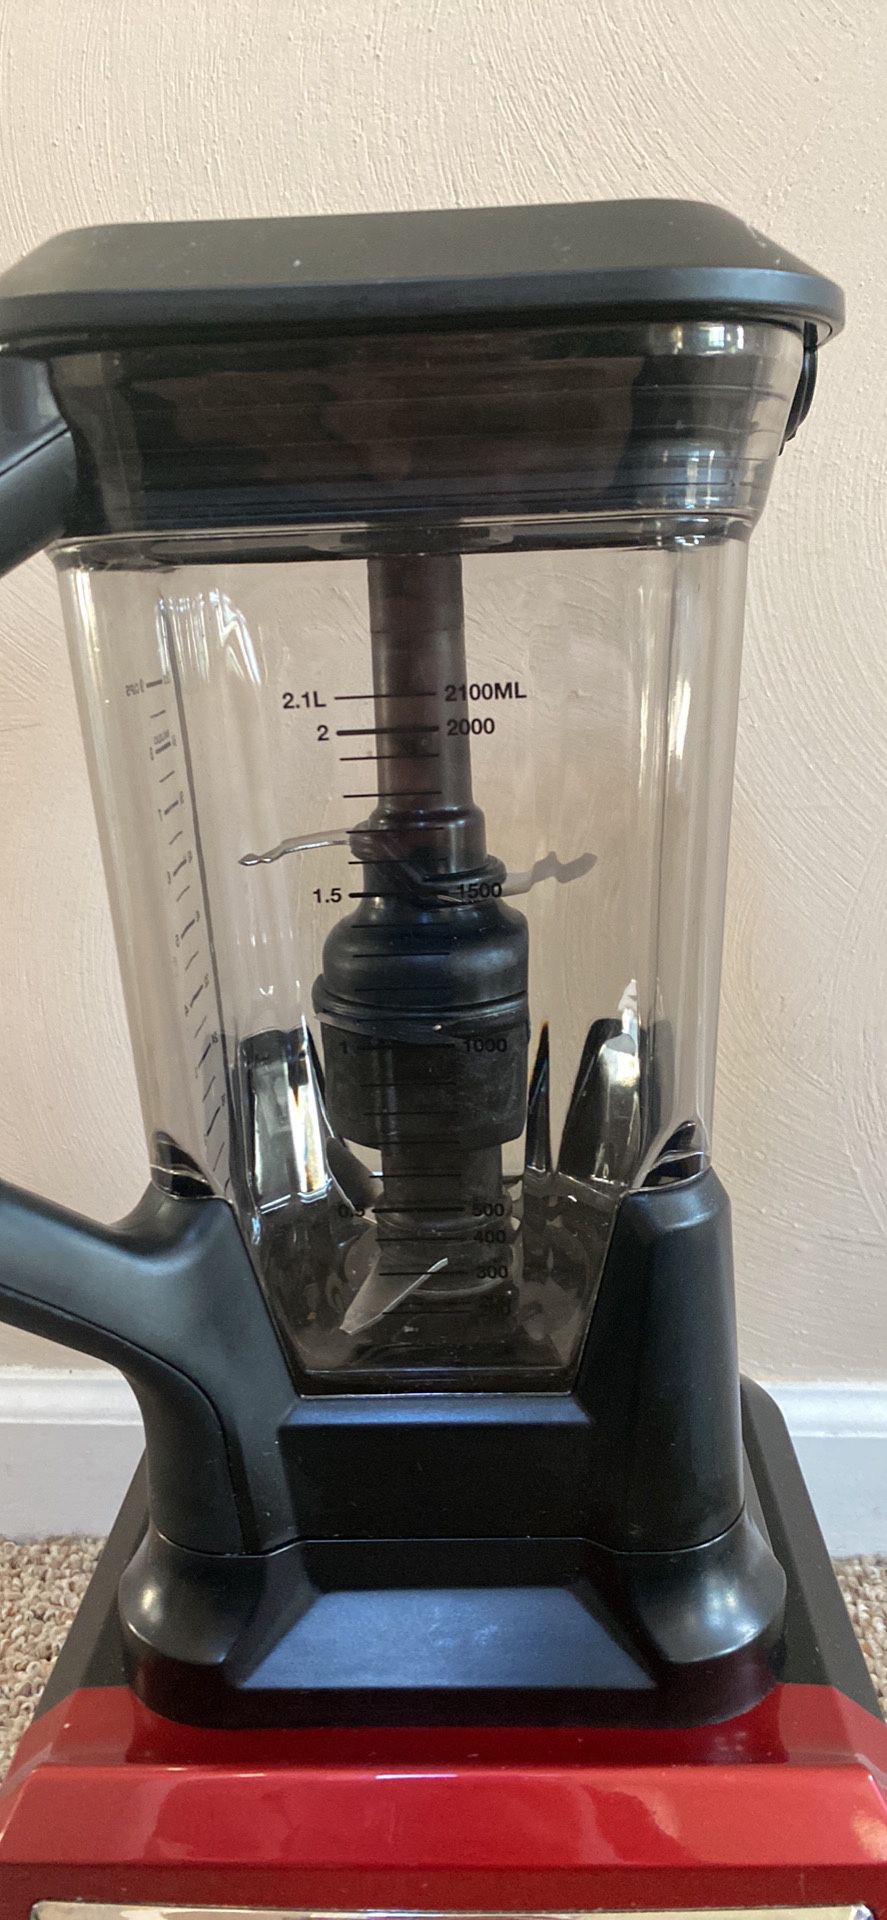 Ninja Professional Plus Blender DUO with Auto-iQ - BN753TGT for Sale in  Stockton, CA - OfferUp